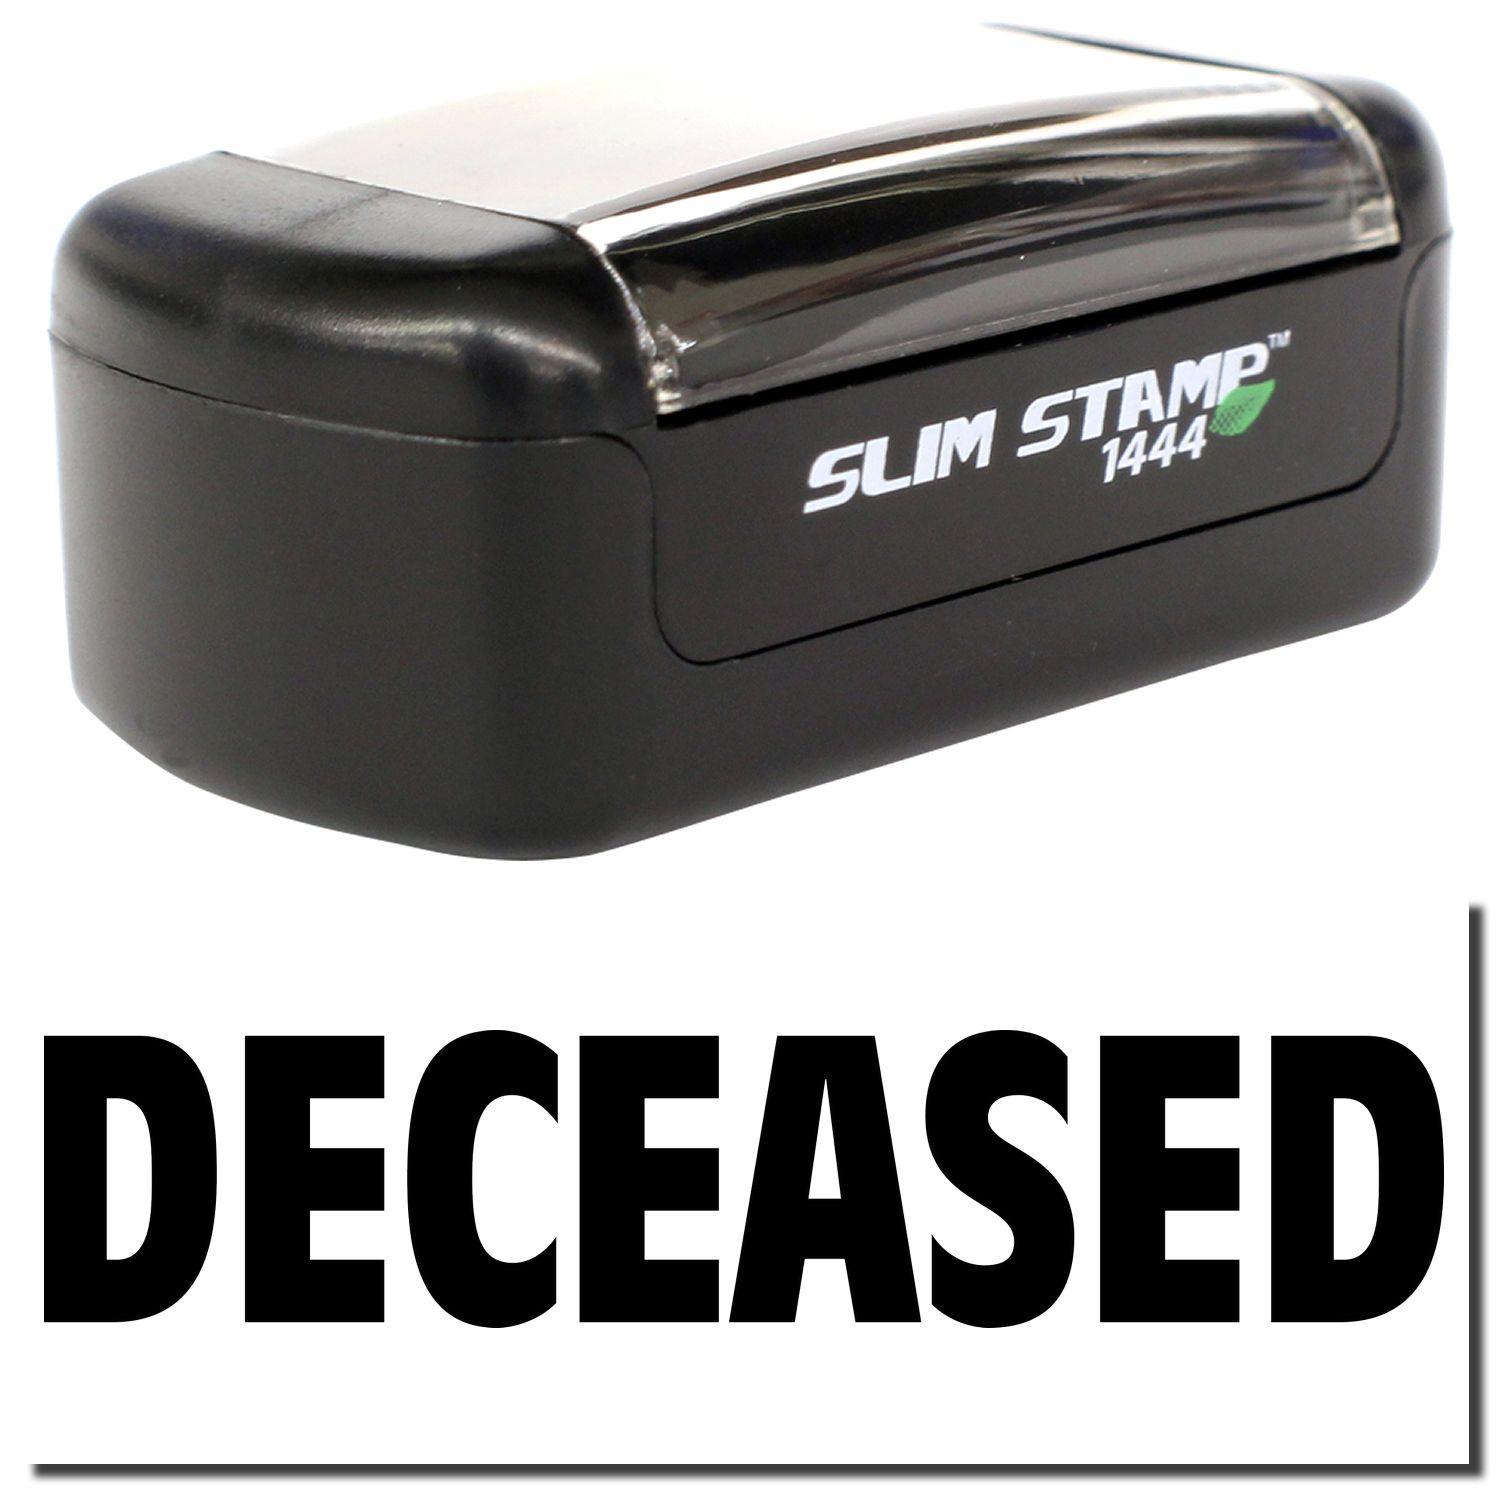 A stock office pre-inked stamp with a stamped image showing how the text "DECEASED" is displayed after stamping.